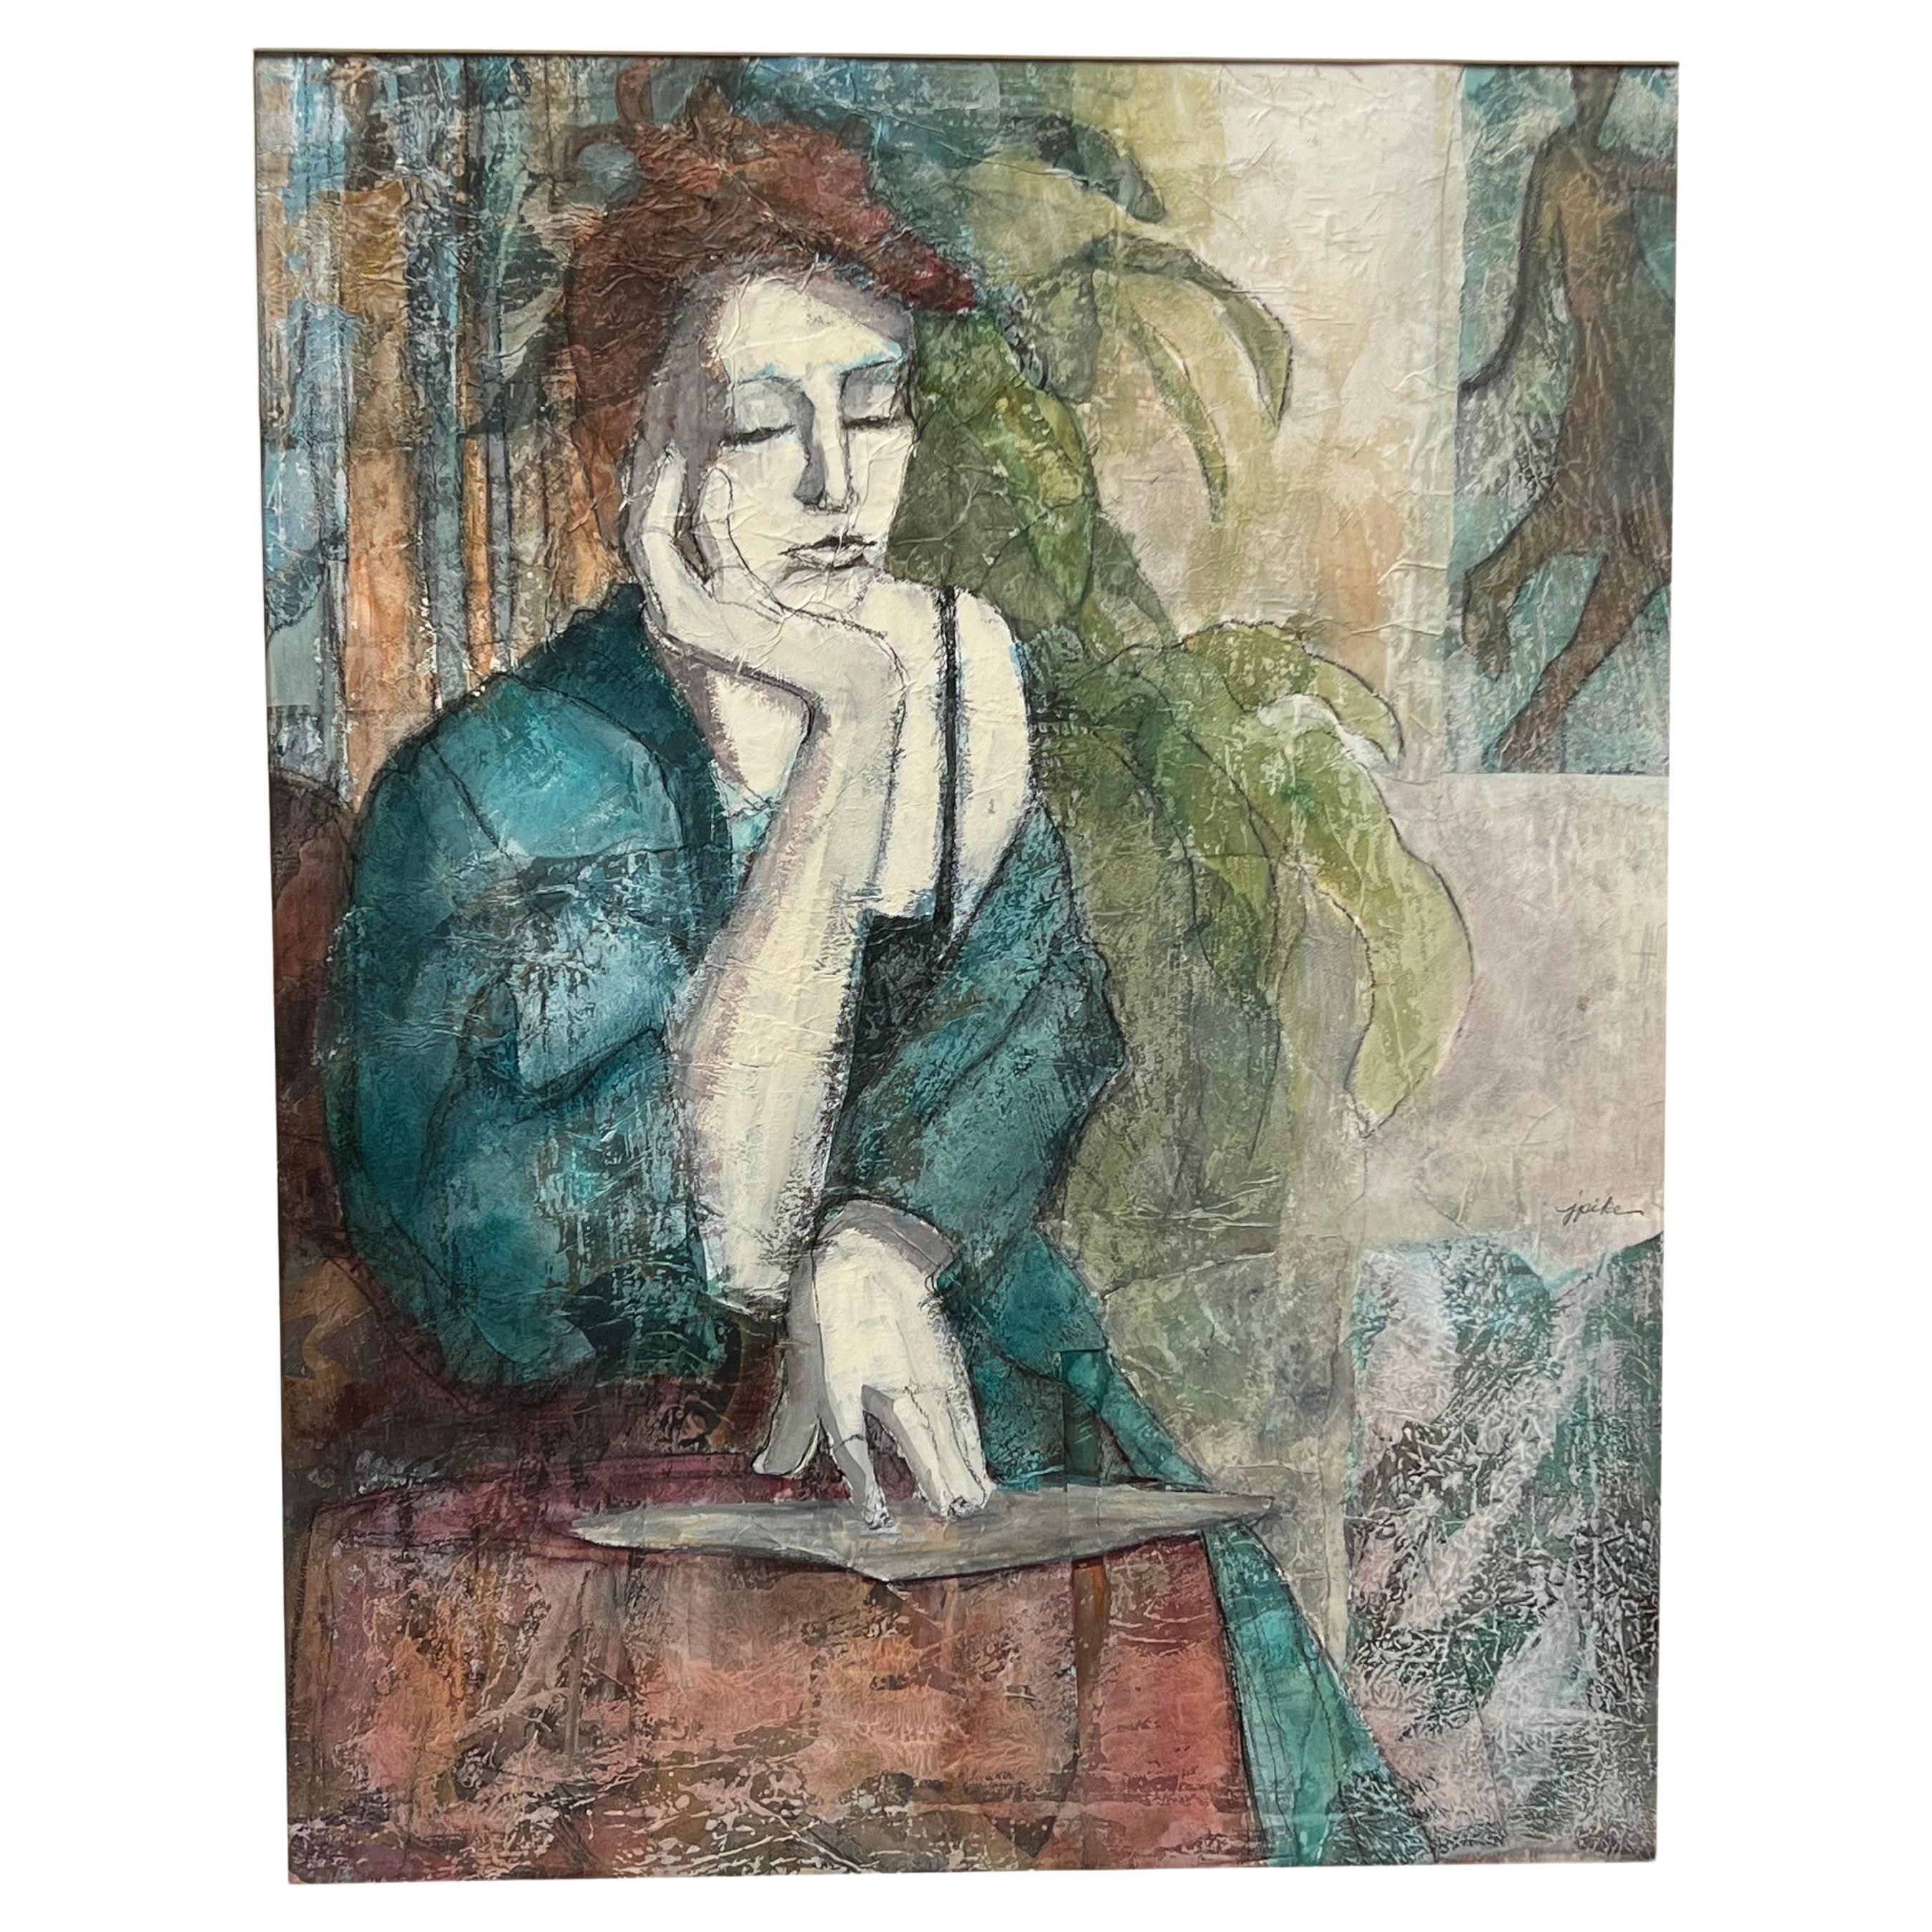 Judith Minna Pike 
December 19, 1942- October 18, 2019
Portrait of a woman sitting with her eyes closed, resting her head on her hand. 
The texture of this piece is stunning. If you look closely, it almost resembles crushed silk. Pike includes a